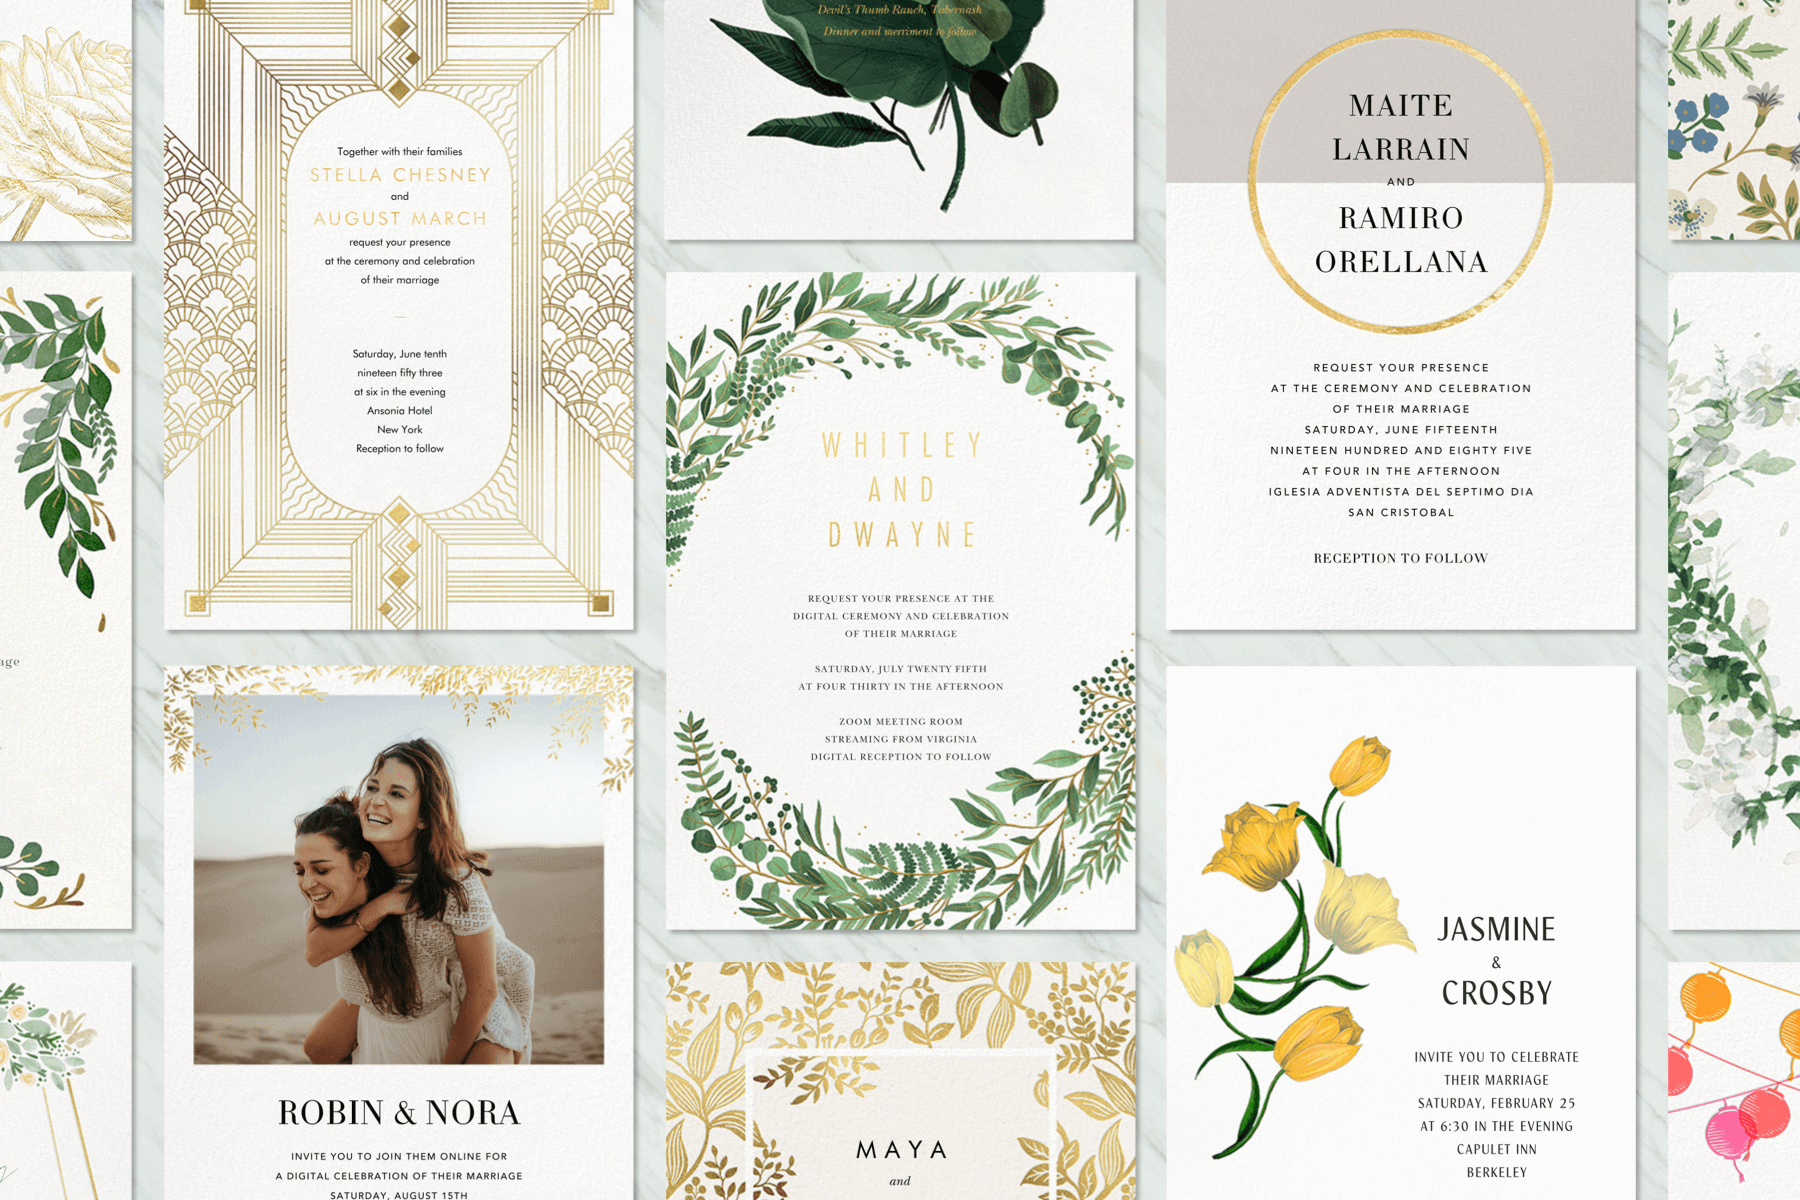 How to Address Wedding Invitations: Guide and Examples